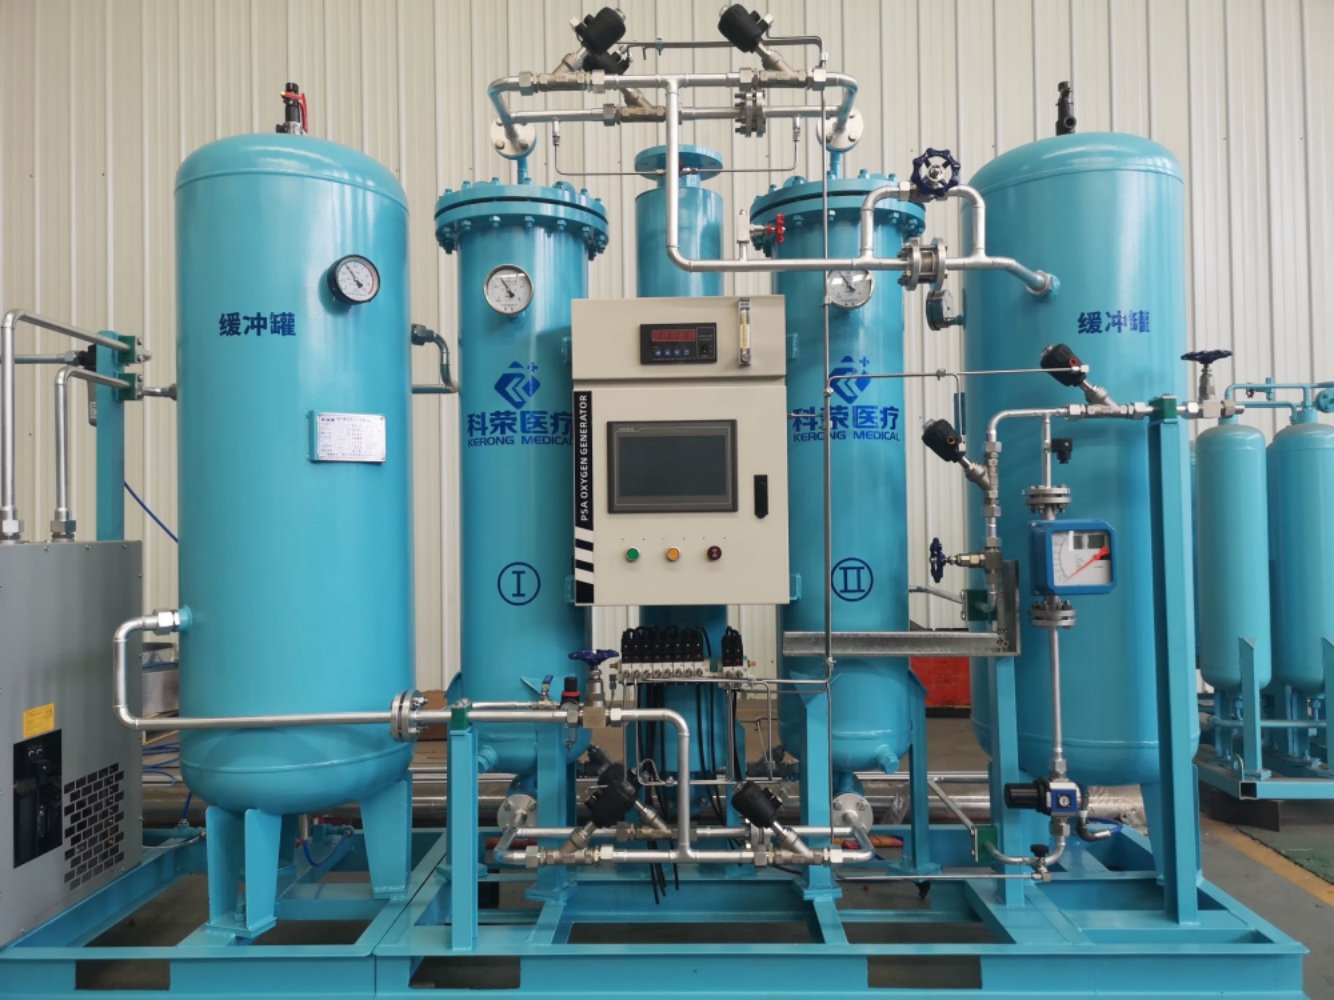 Compressed air requirements for nitrogen generator